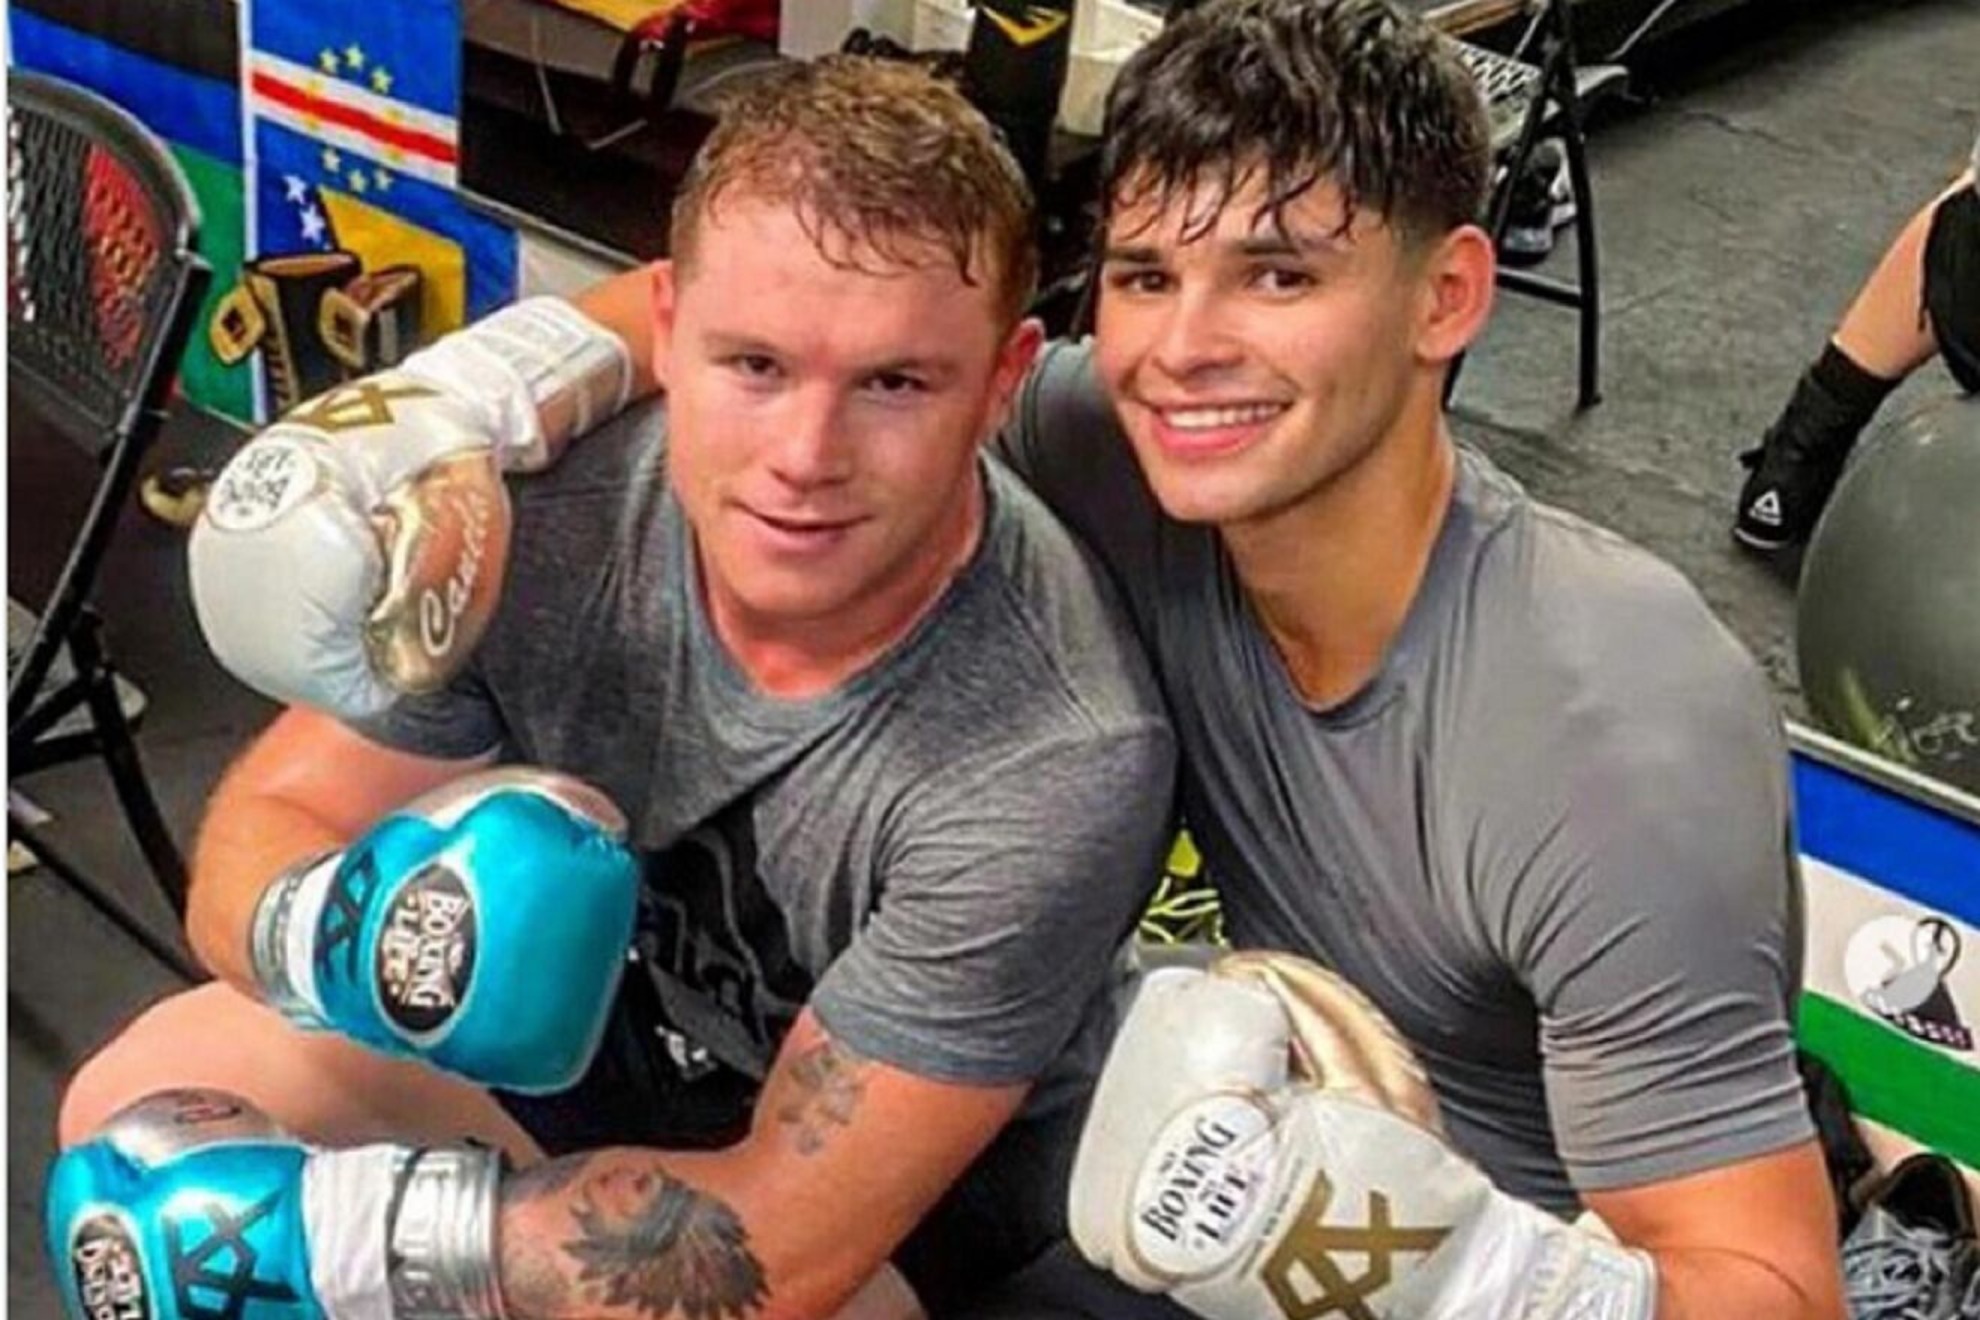 Ryan Garcia seems to have fully reconciled with Canelo Alvarez and Eddy Reynoso.